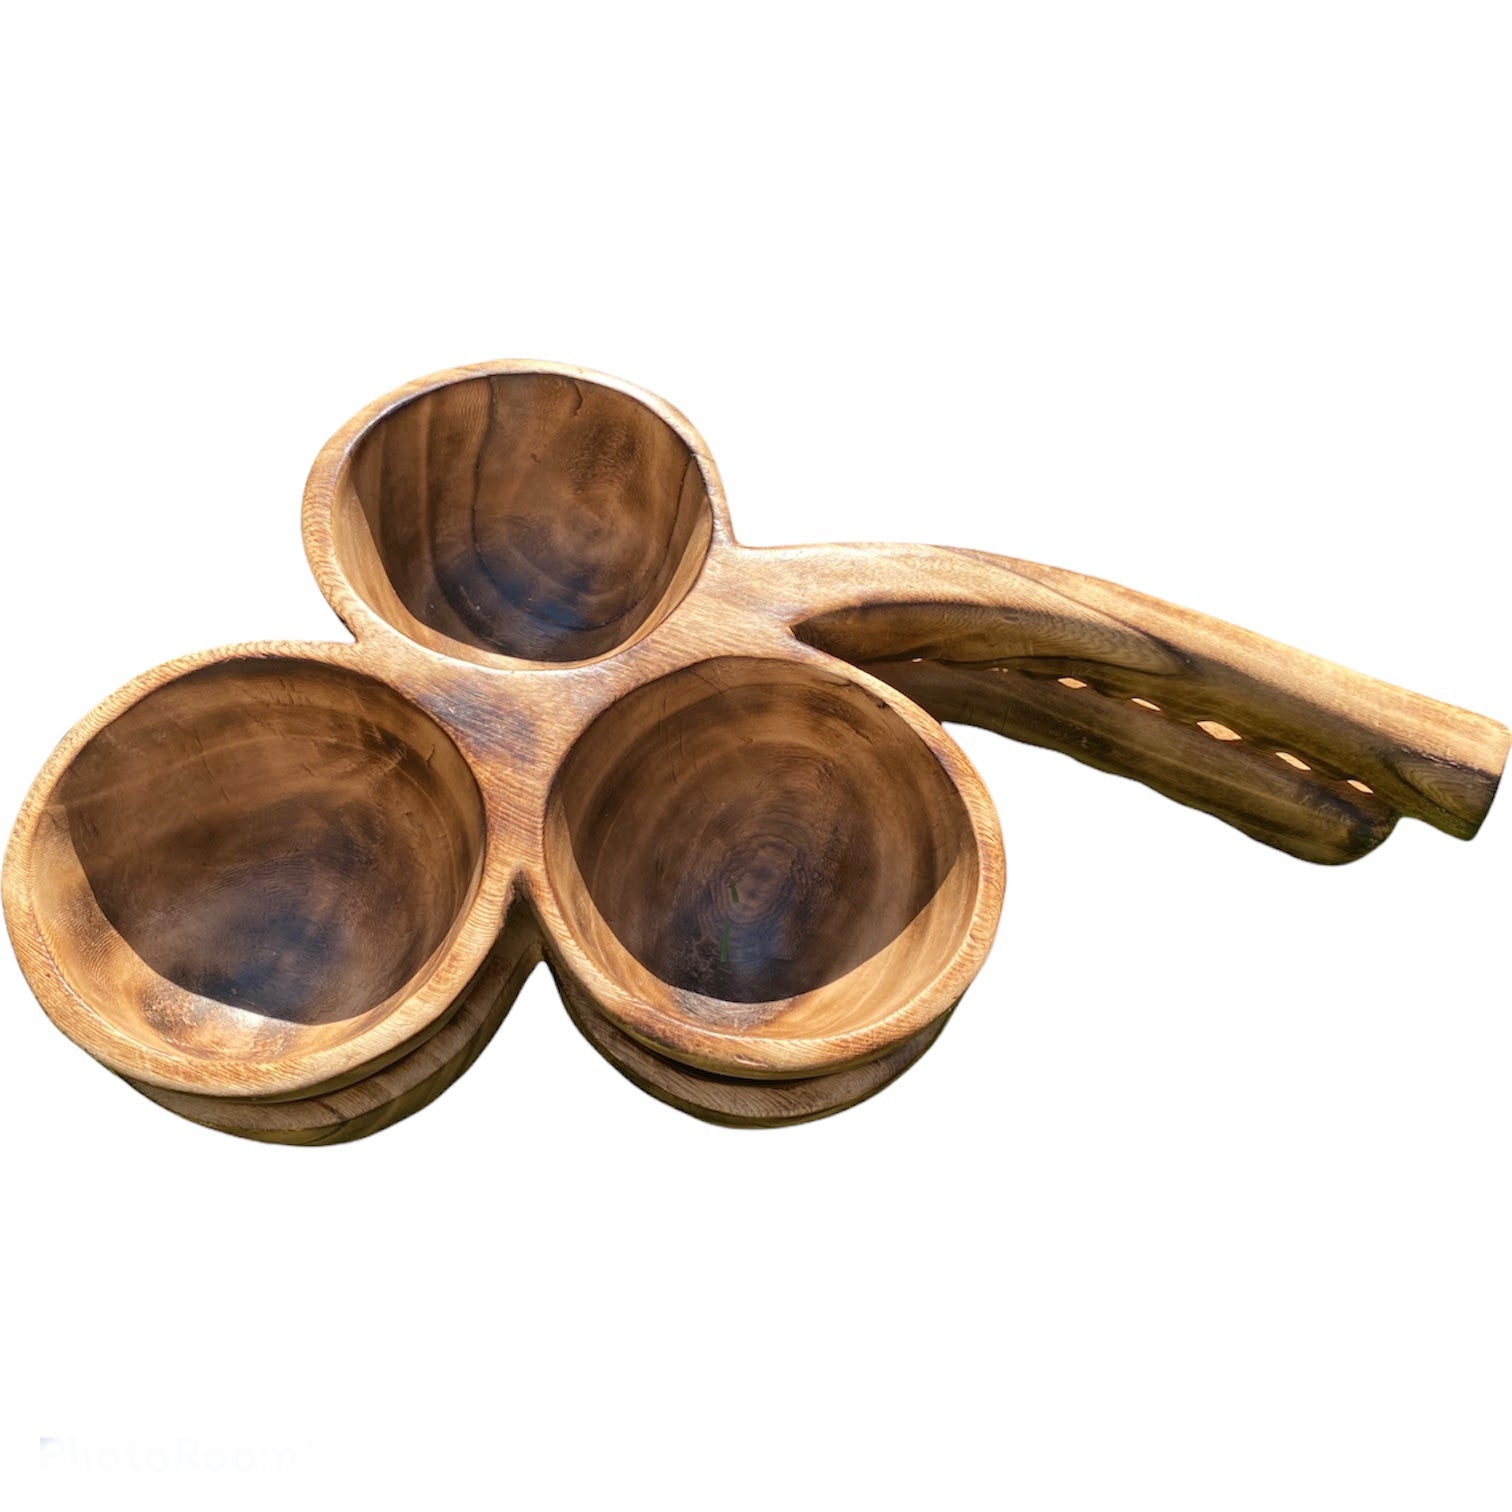 Wooden Serving Bowl with Handle 3 in 1l